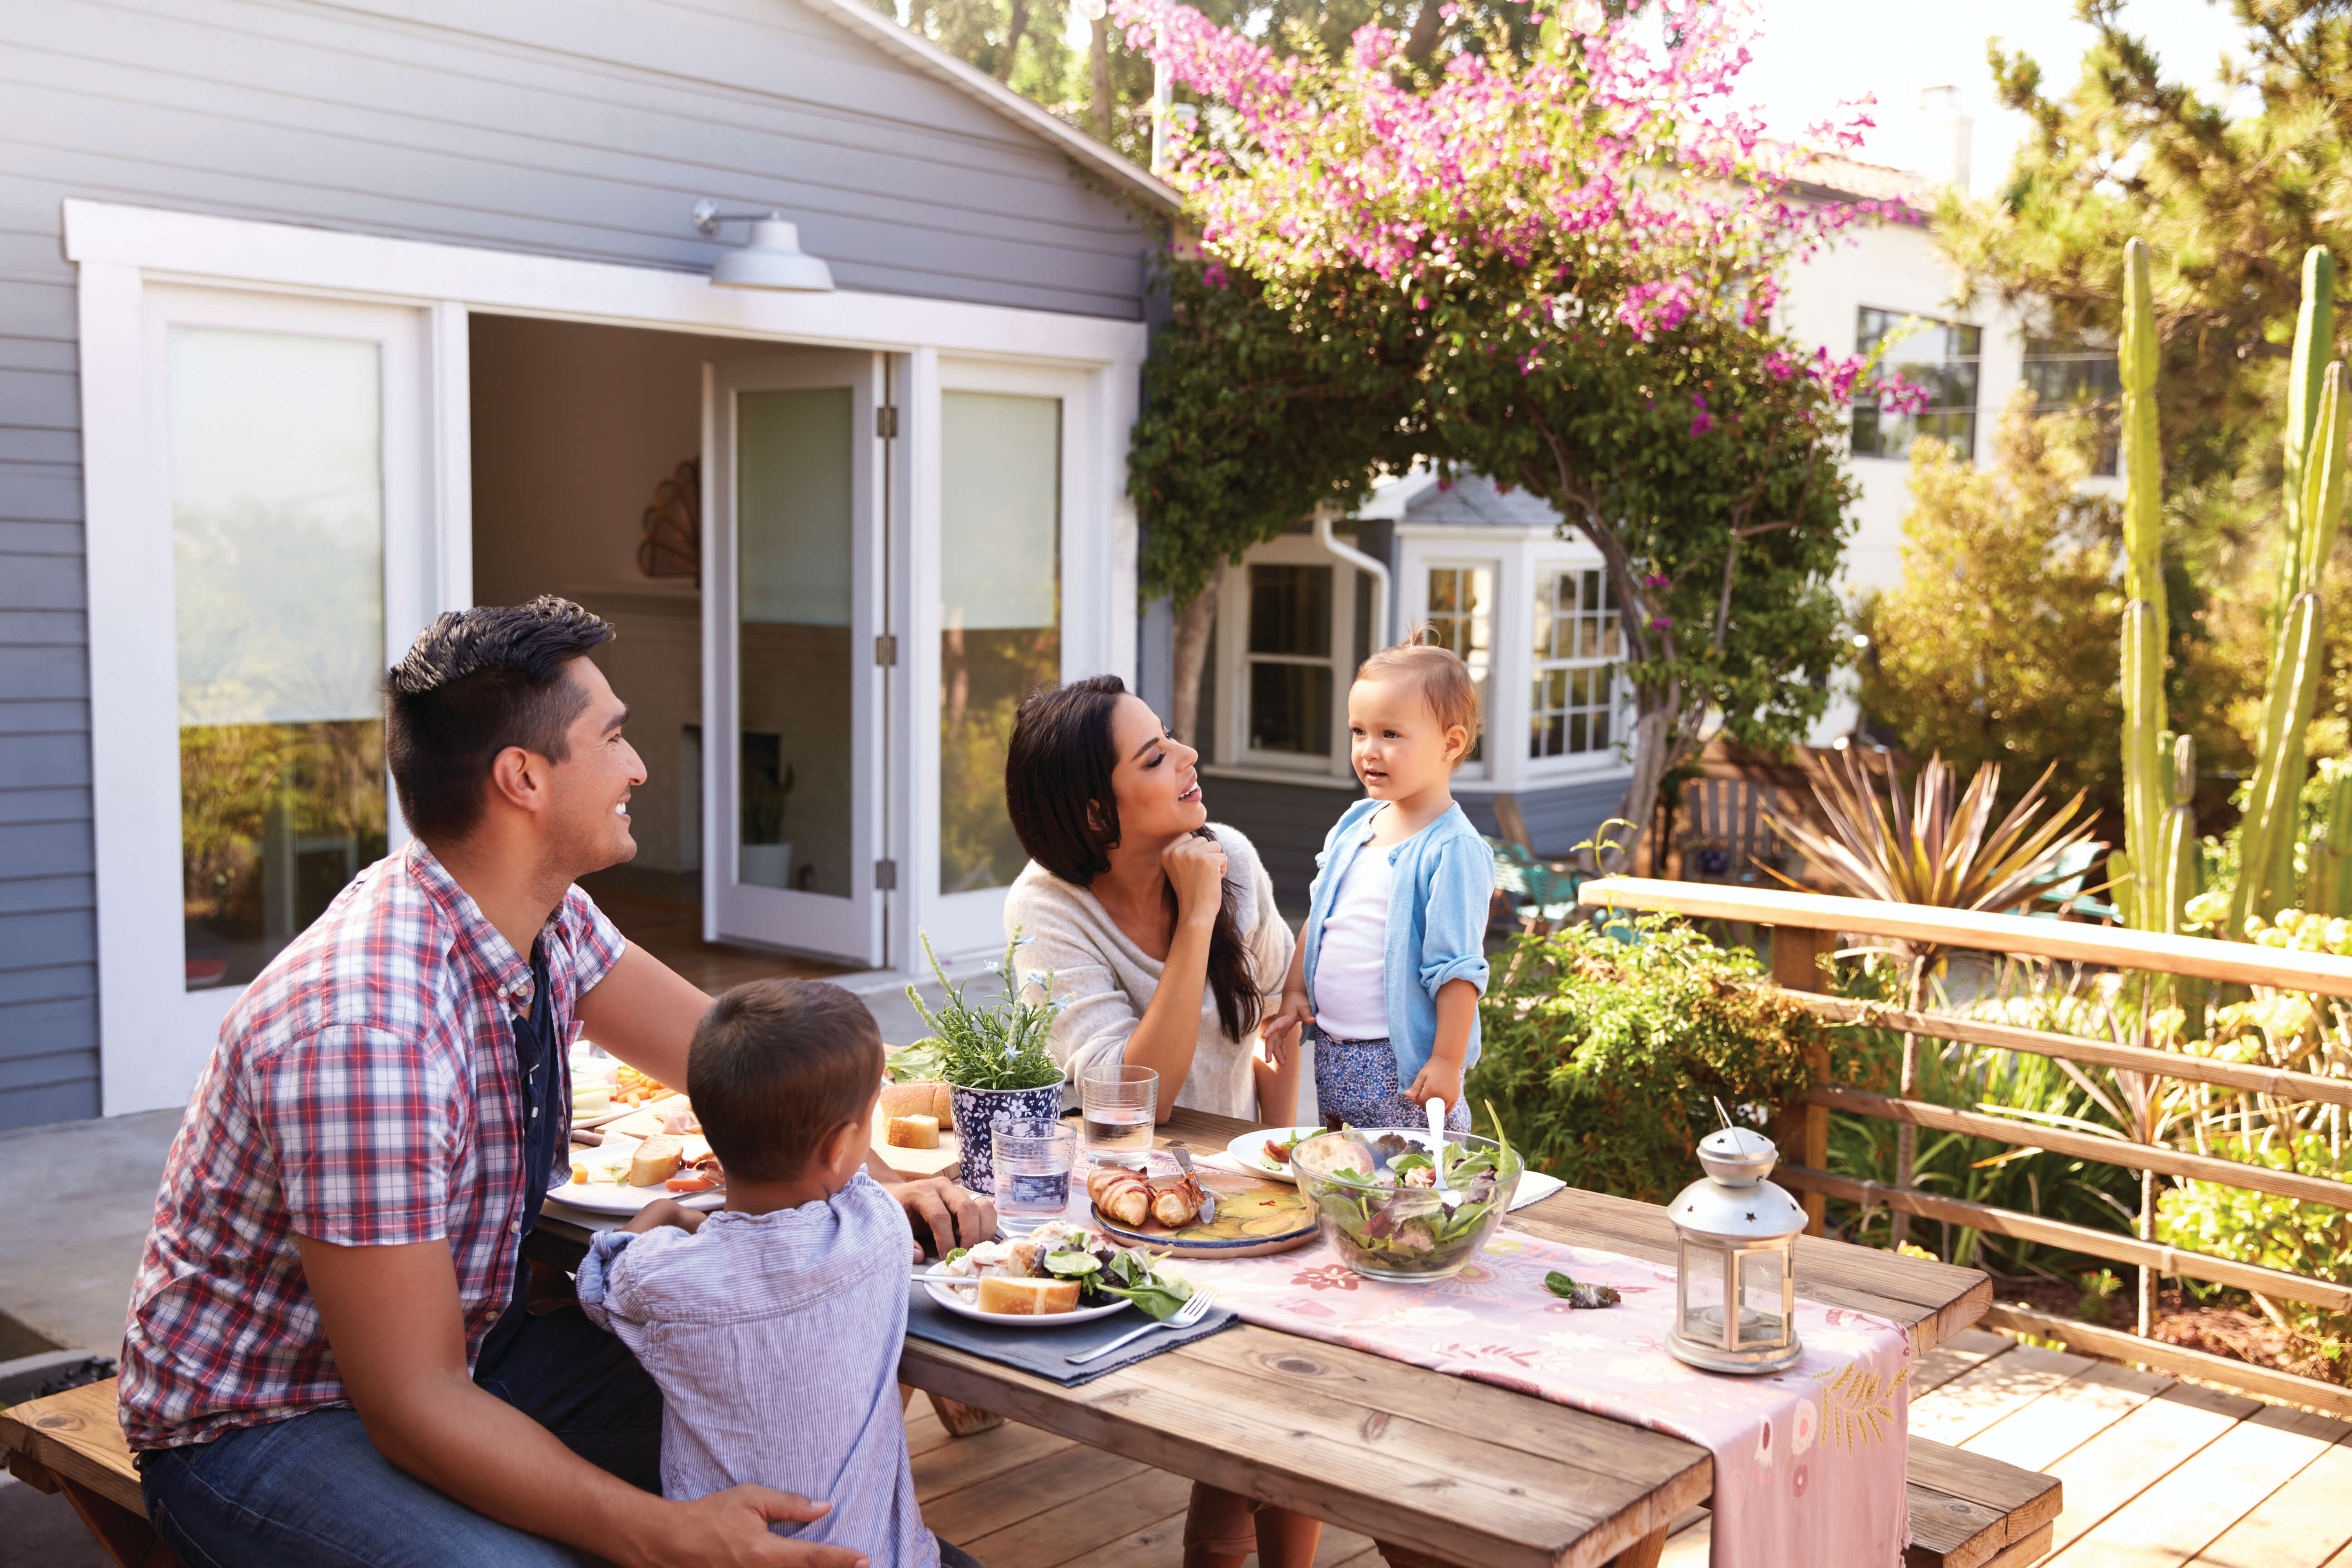 Family At Home Eating Outdoor Meal In Garden Together